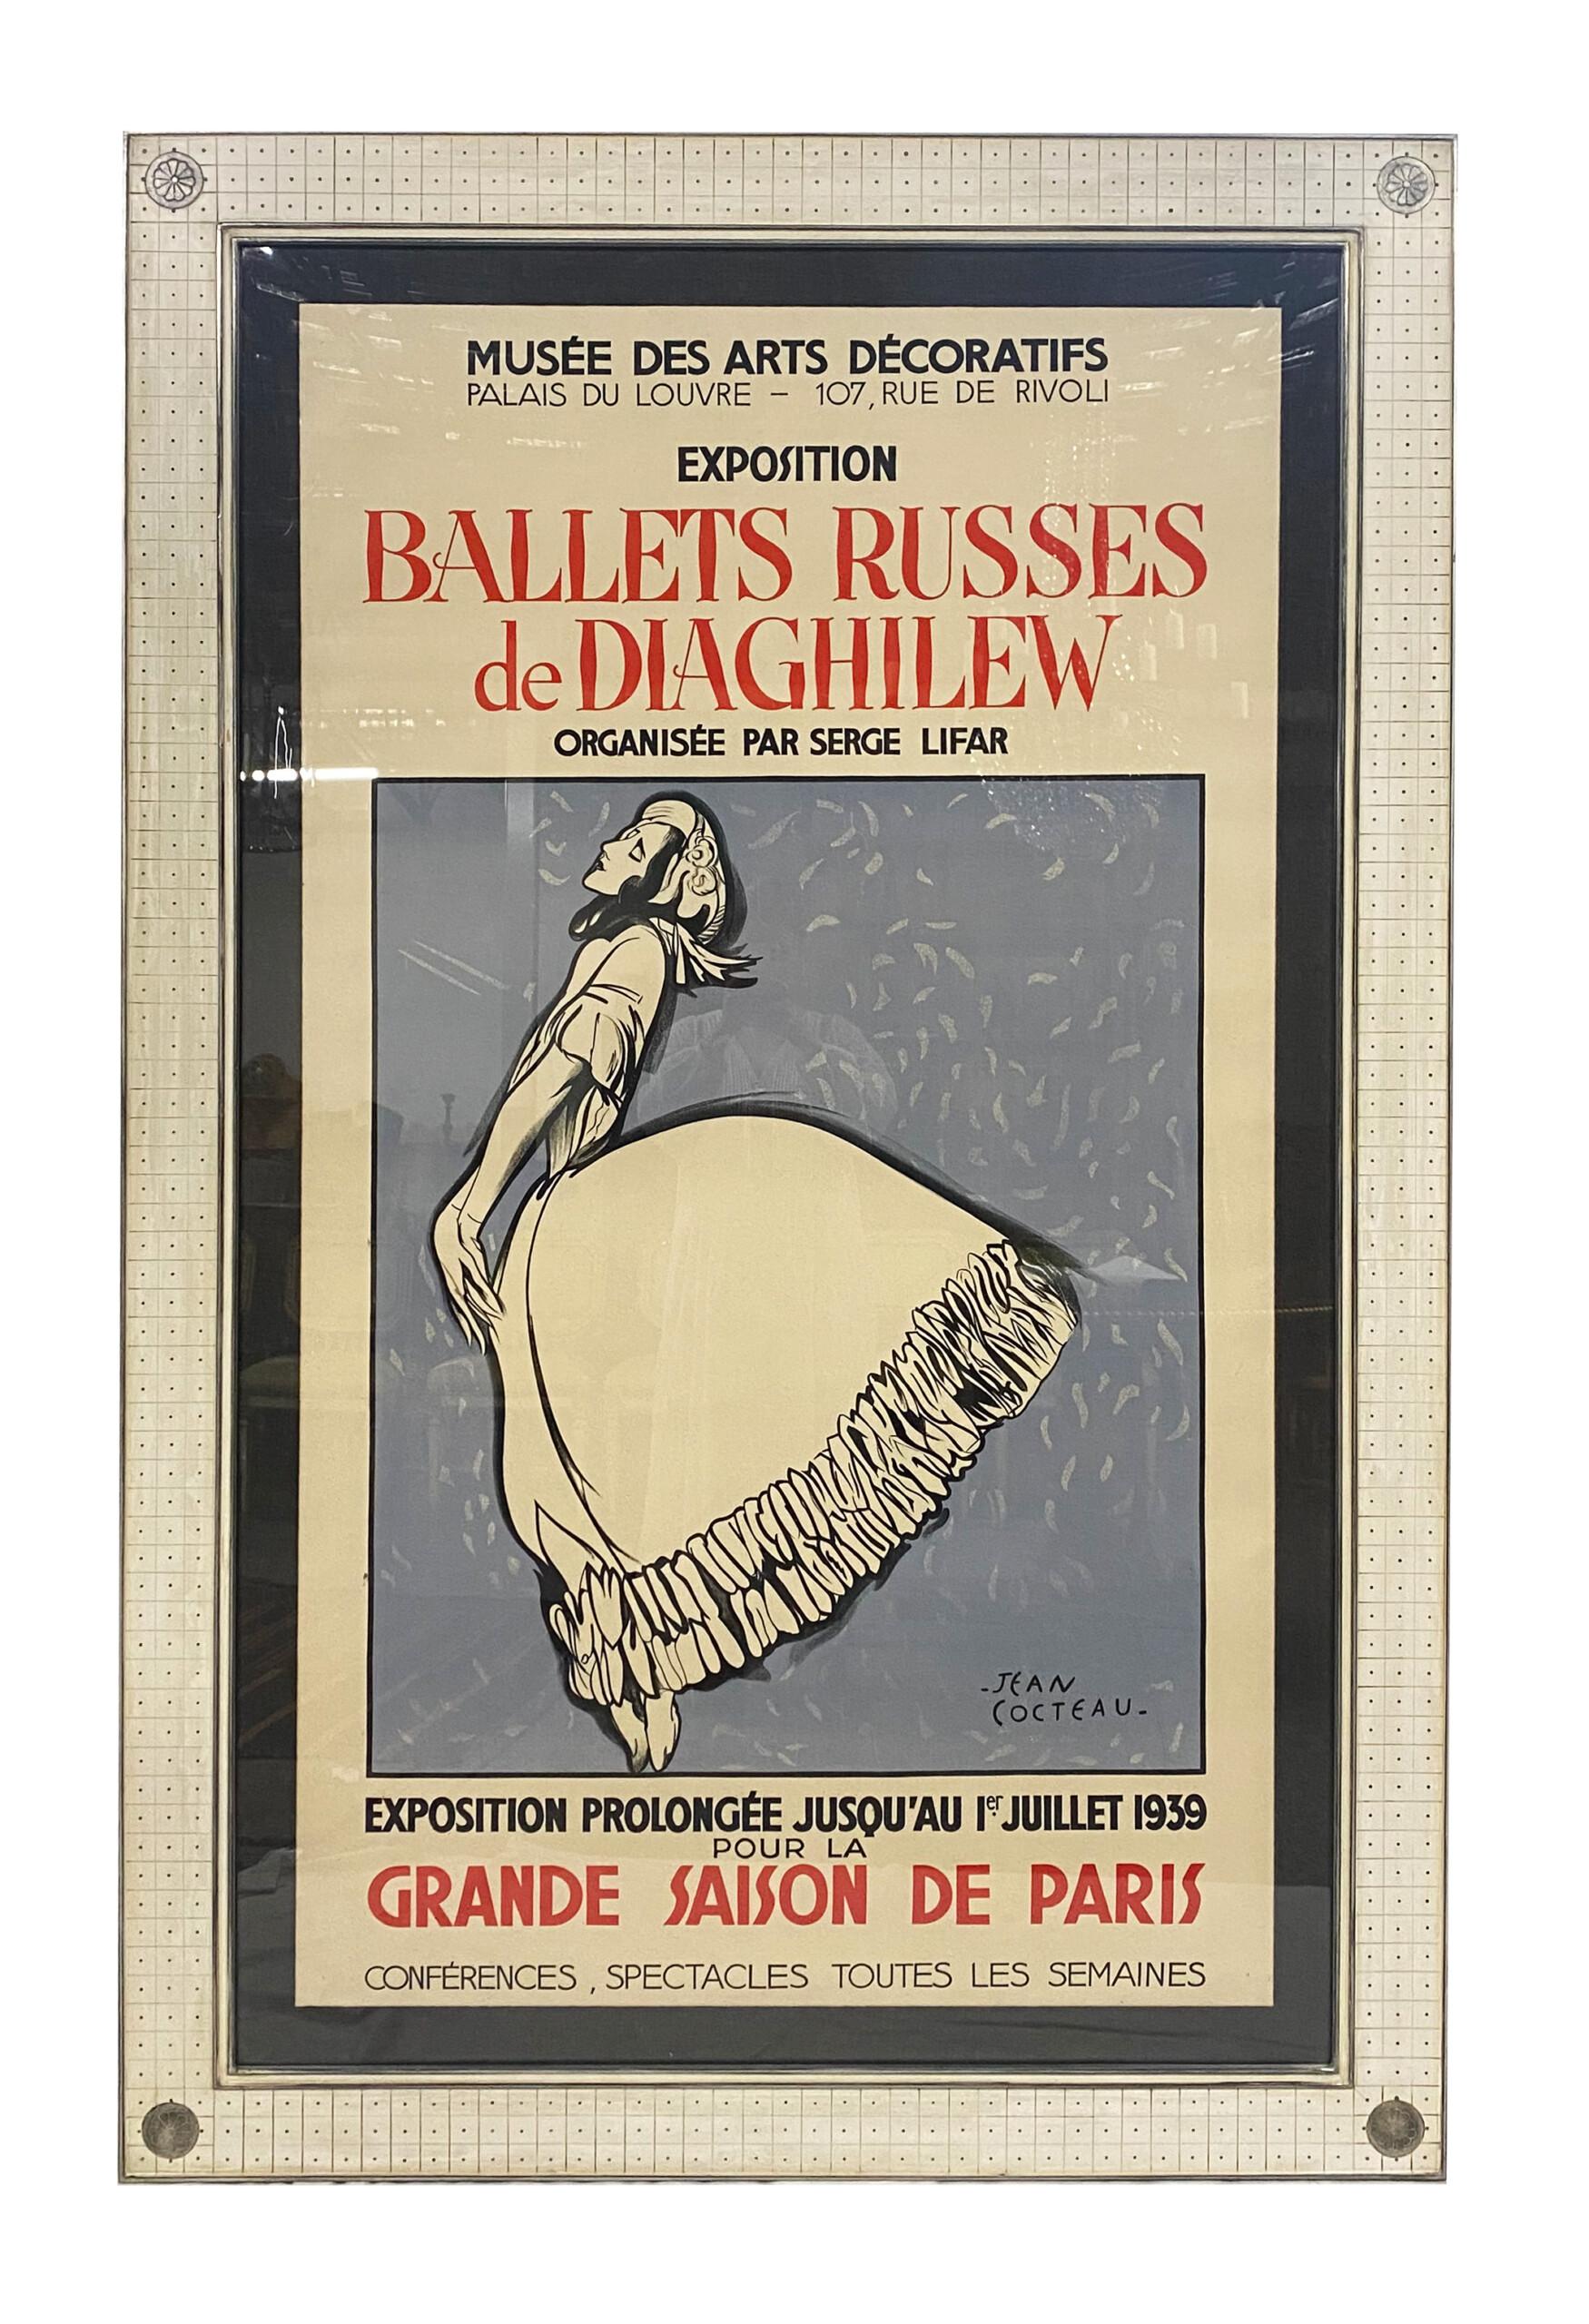 Dimensions with Frame: 43? x 73?
Artist: Jean Cocteau
Medium: Original Stone Lithograph Vintage Poster

c. 1939


Advertising poster for the 1939 exhibition BALLETS RUSSES DE DIAGHILEW 1909 A 1929 Musee des Art Decoratifs. Our 1939 poster was